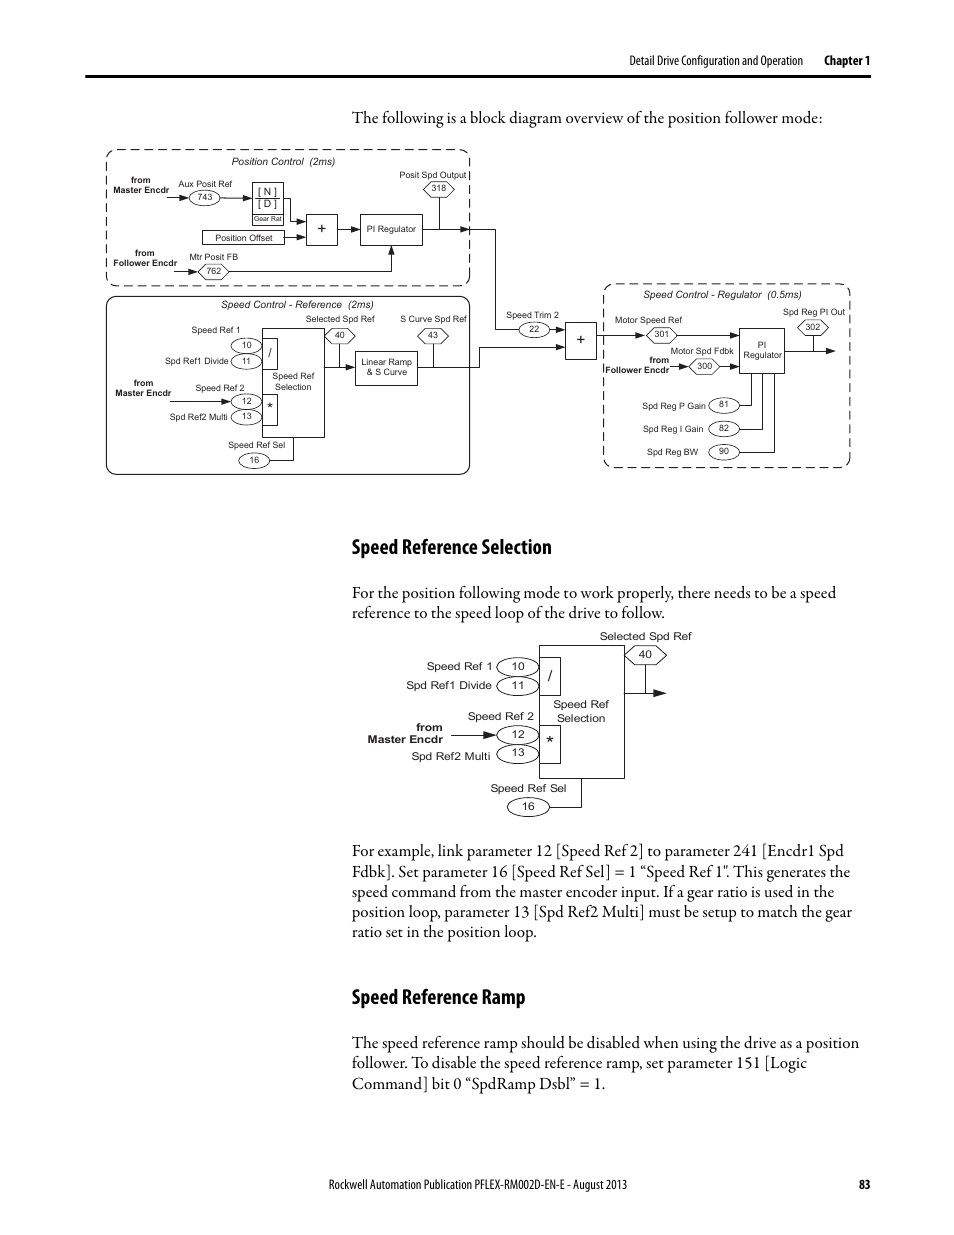 Speed reference selection, Speed reference ramp, Speed reference selection speed reference ramp | Rockwell Automation 20D PowerFlex 700S with Phase I Control Reference Manual User Manual | Page 83 / 190